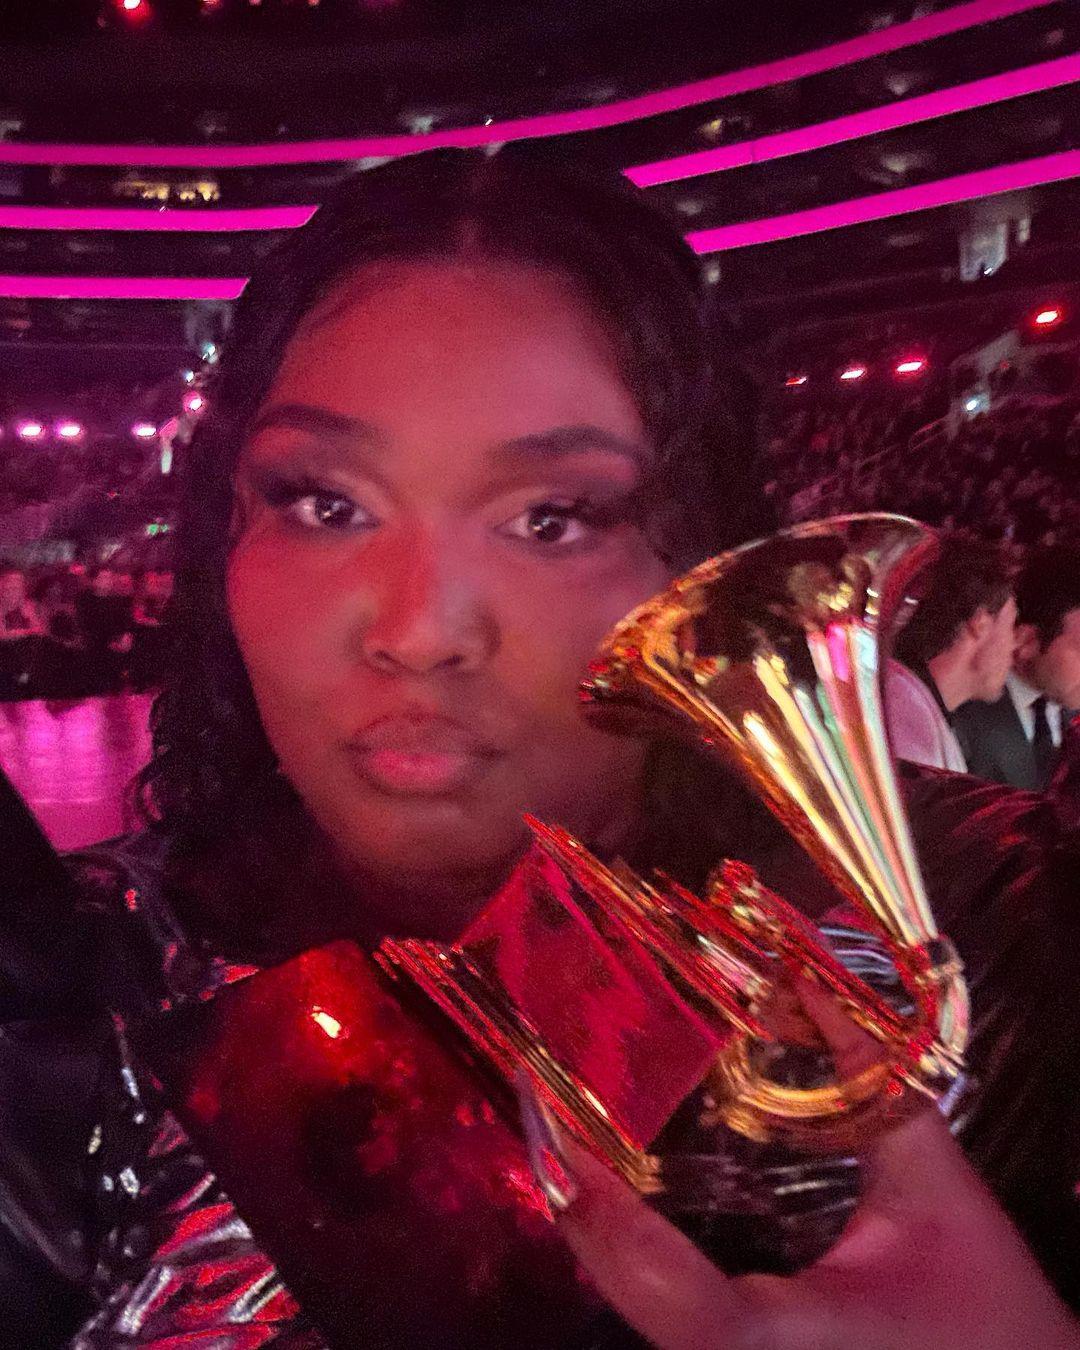 Lizzo dedicates Grammy to Prince and positive music